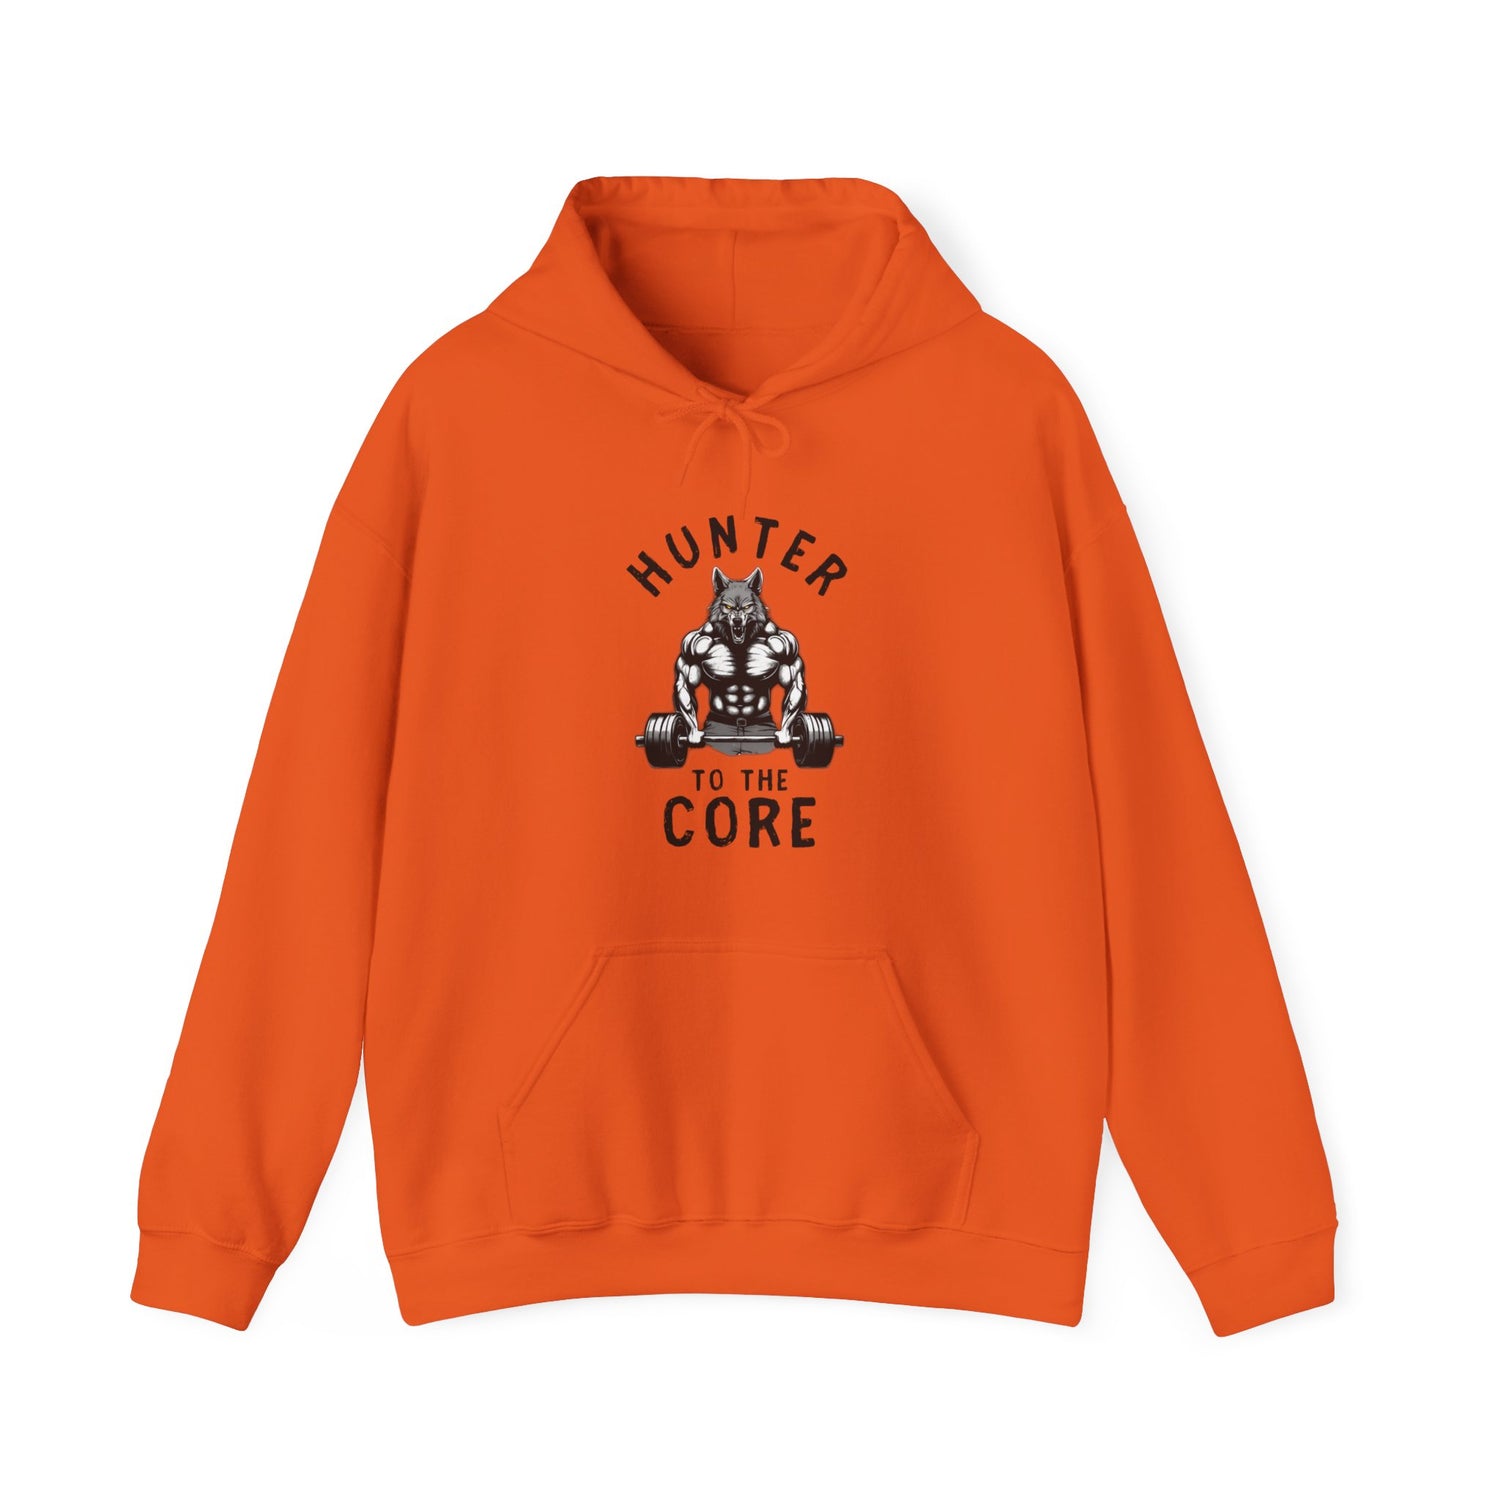 Western Hunting Hoodie - Hunter to the Core